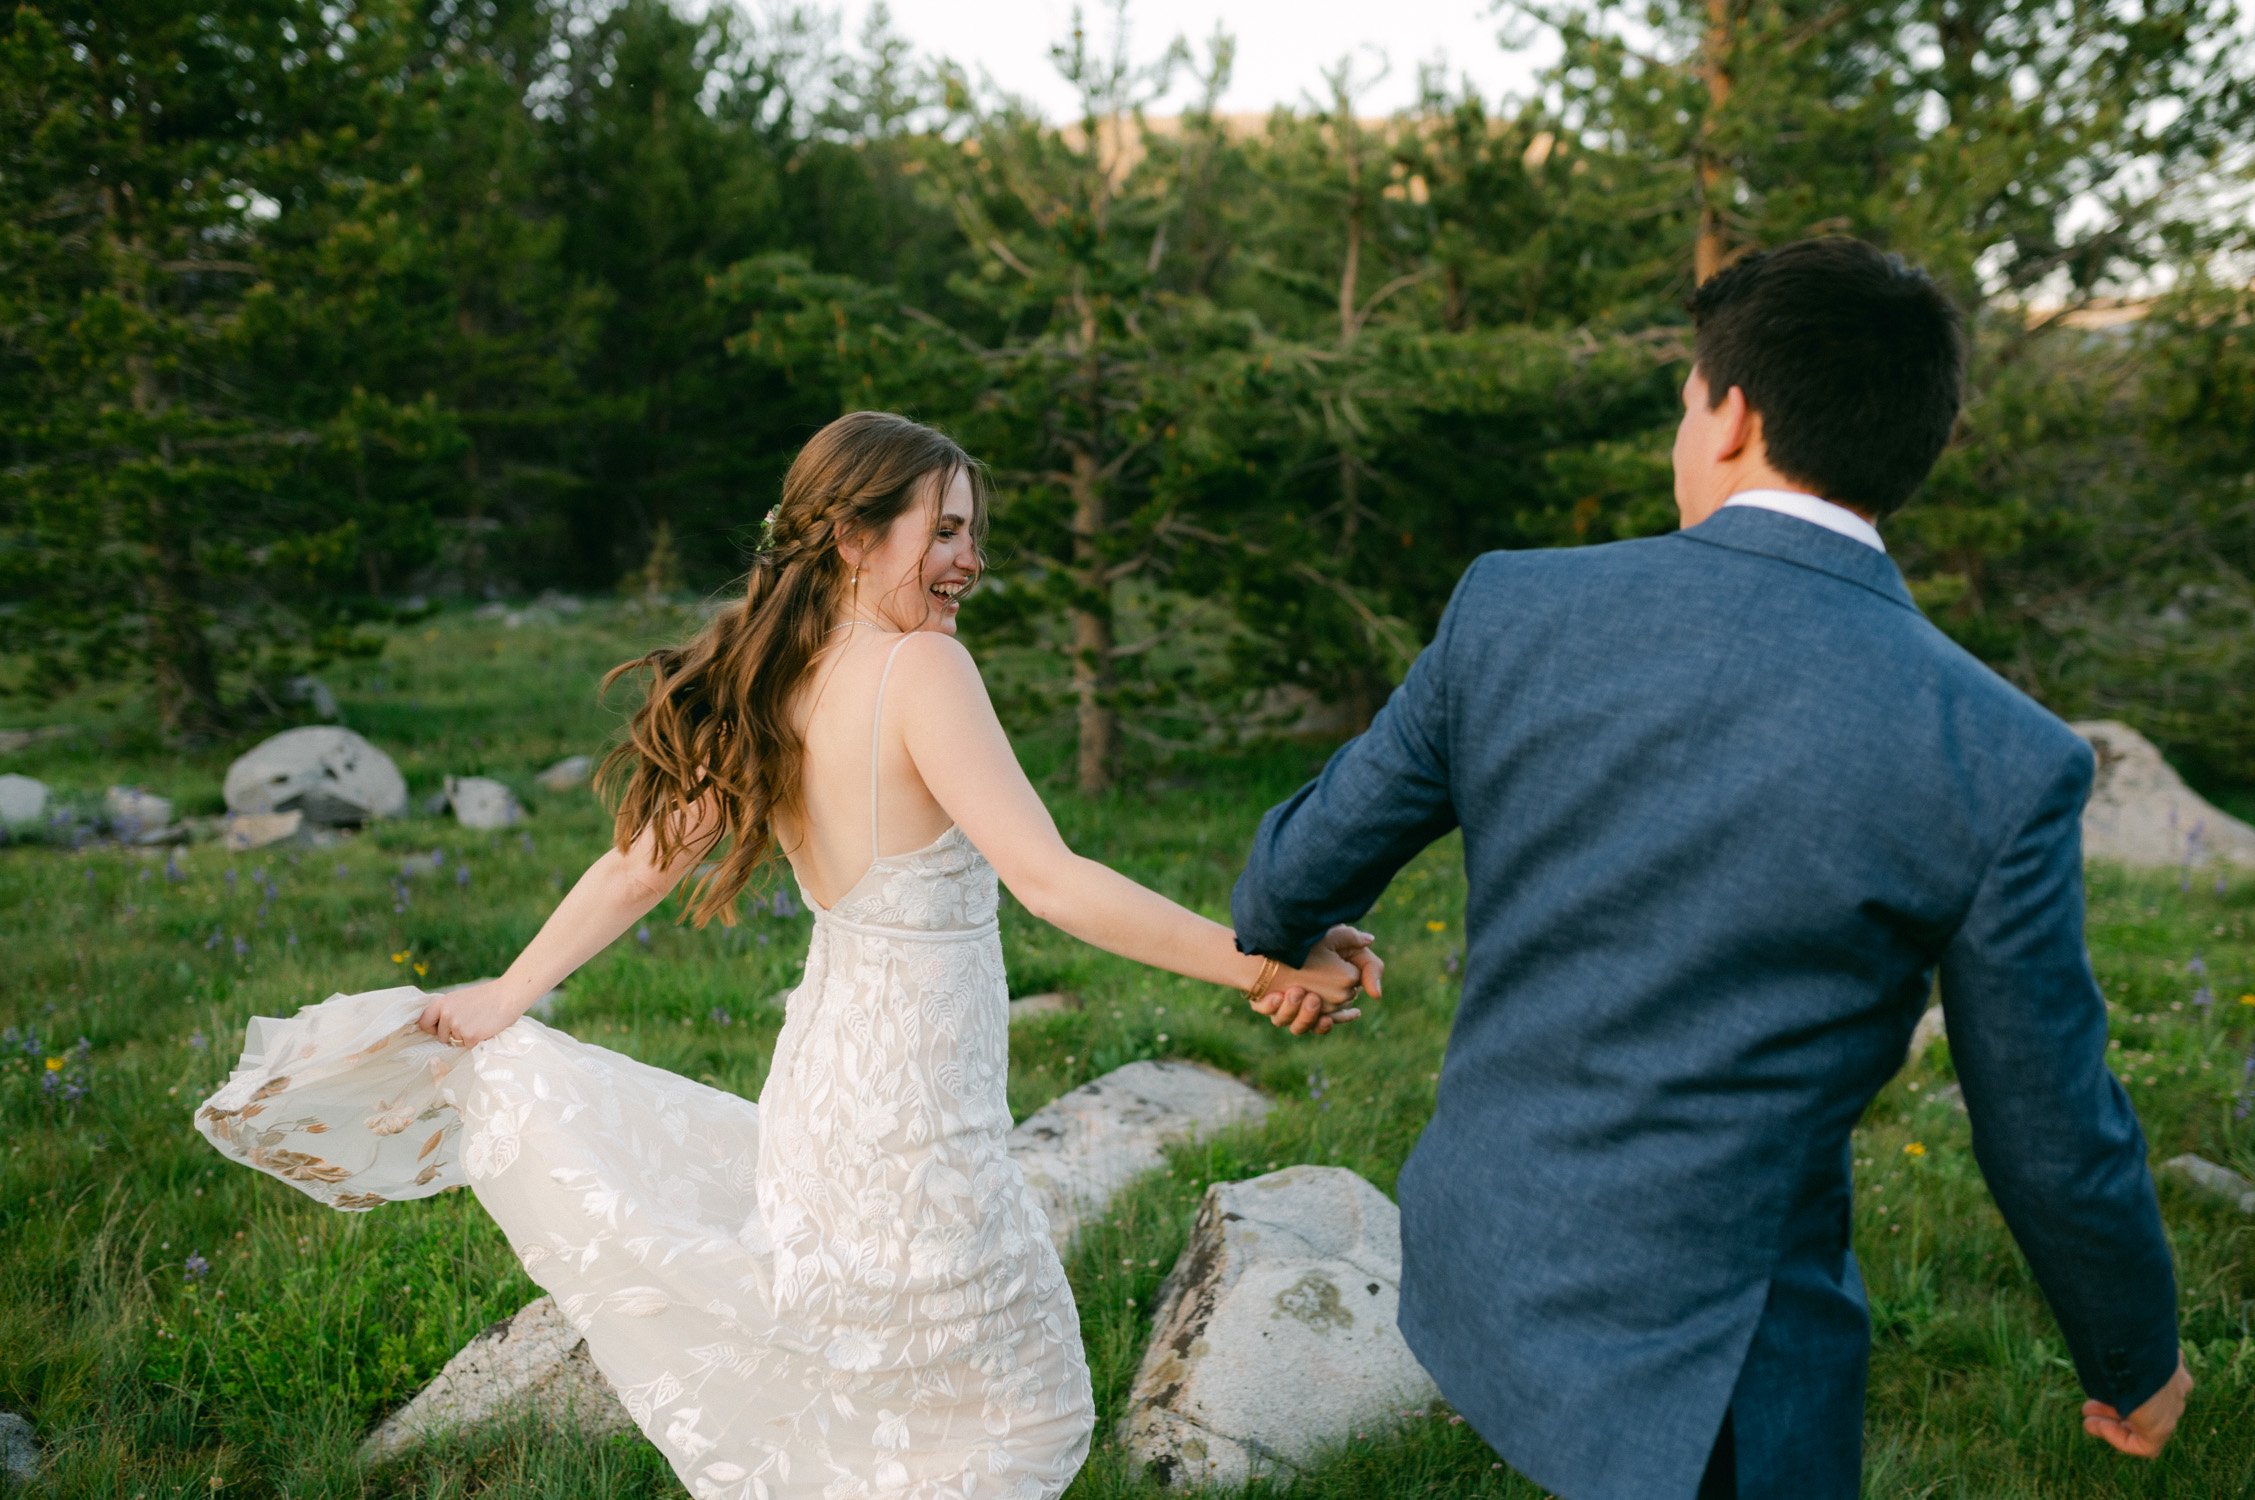 Desolation wilderness hotel wedding, photo of a newly wed couple during their sunset photos